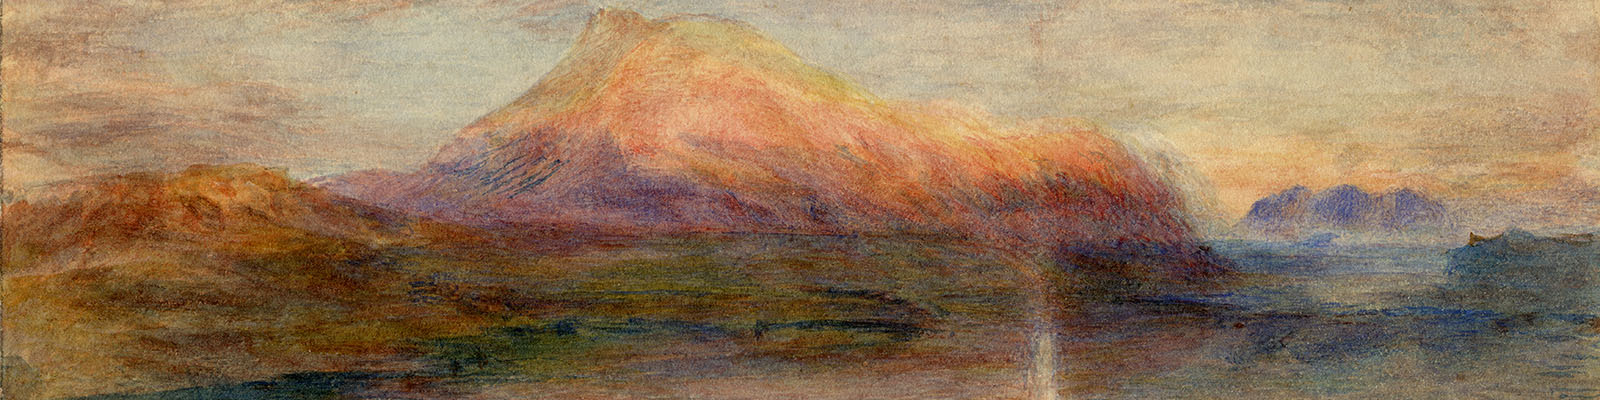 Isabella Jay, The Red Righi, after Turner